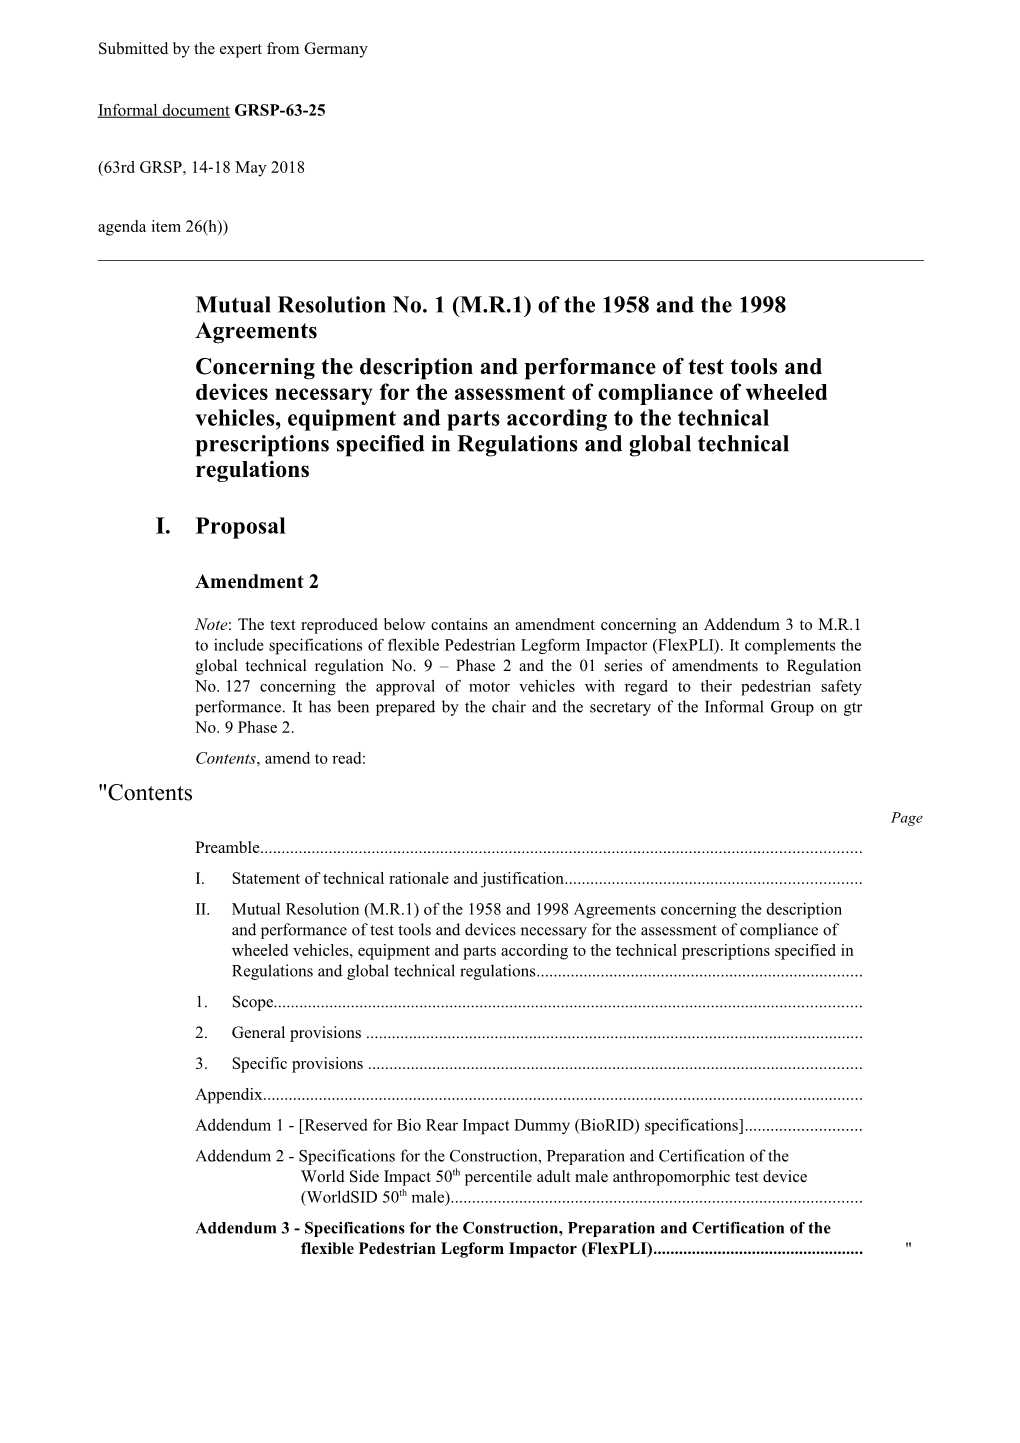 Mutualresolution No. 1 (M.R.1) of the 1958 and the 1998 Agreements